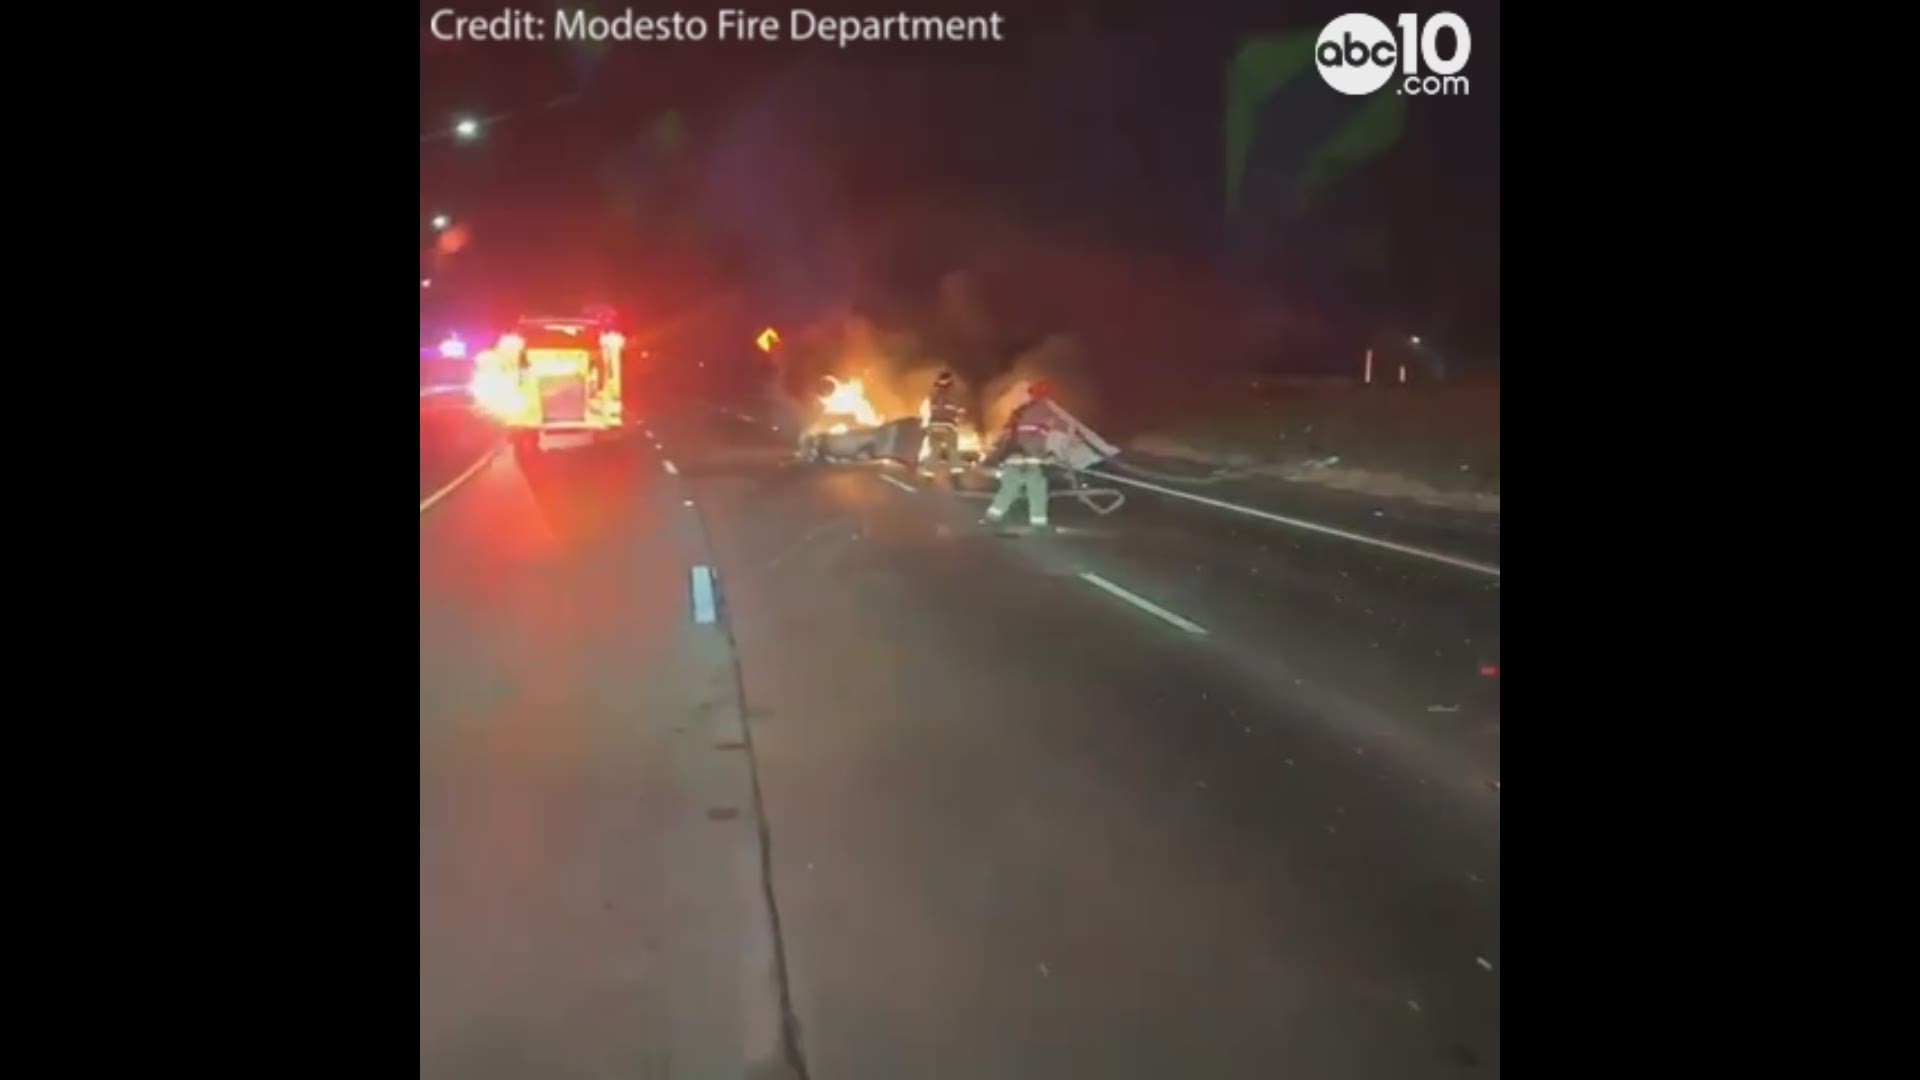 A plane crash in Modesto shut down Highway 99. The plane caught fire after landing on the freeway, but the pilot managed to walk away with very minor injuries.